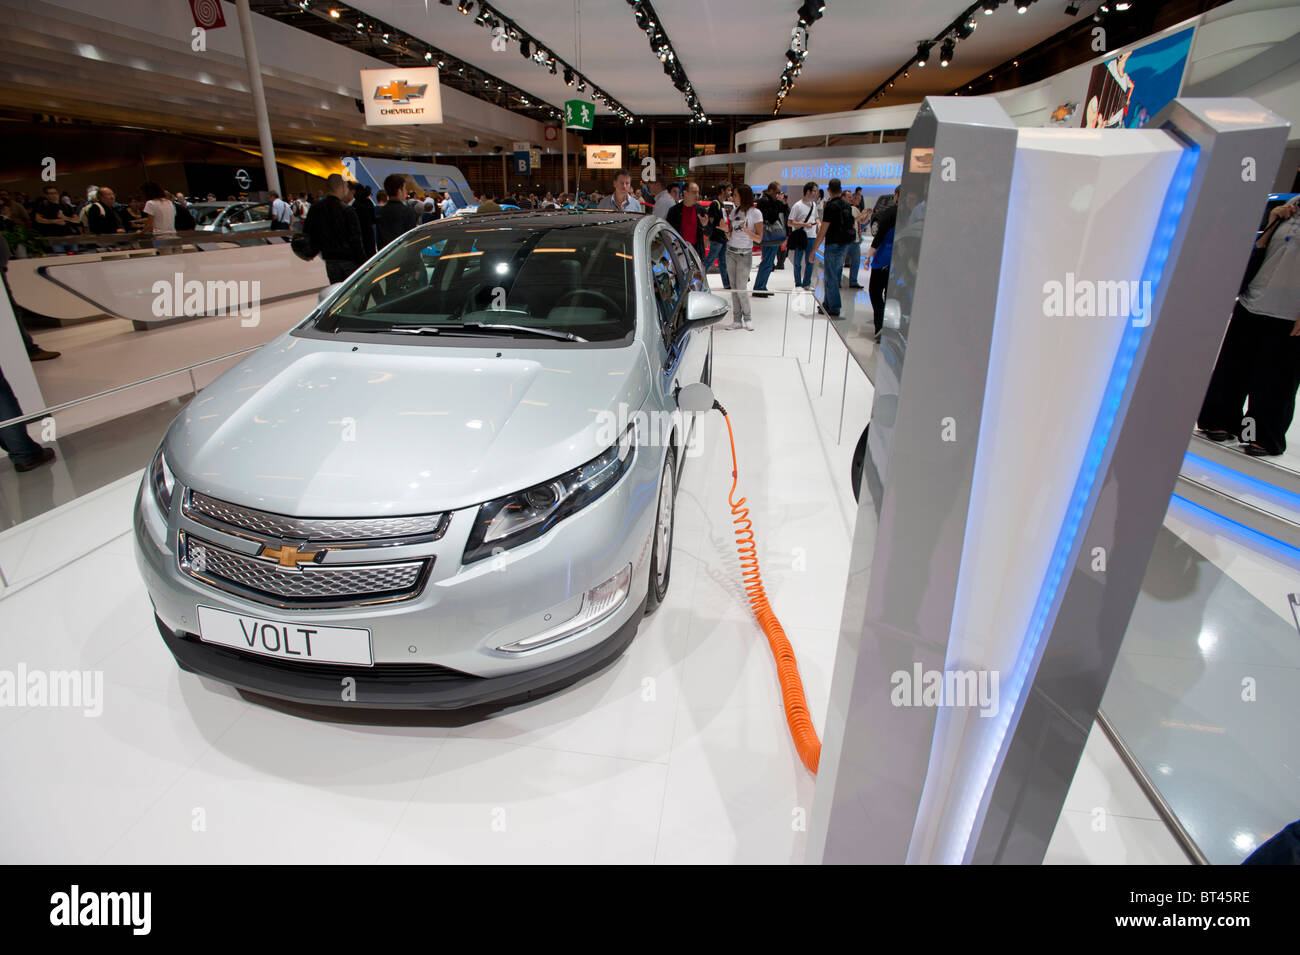 Chevrolet Volt electric car being recharged at Paris Motor Show 2010 Stock Photo